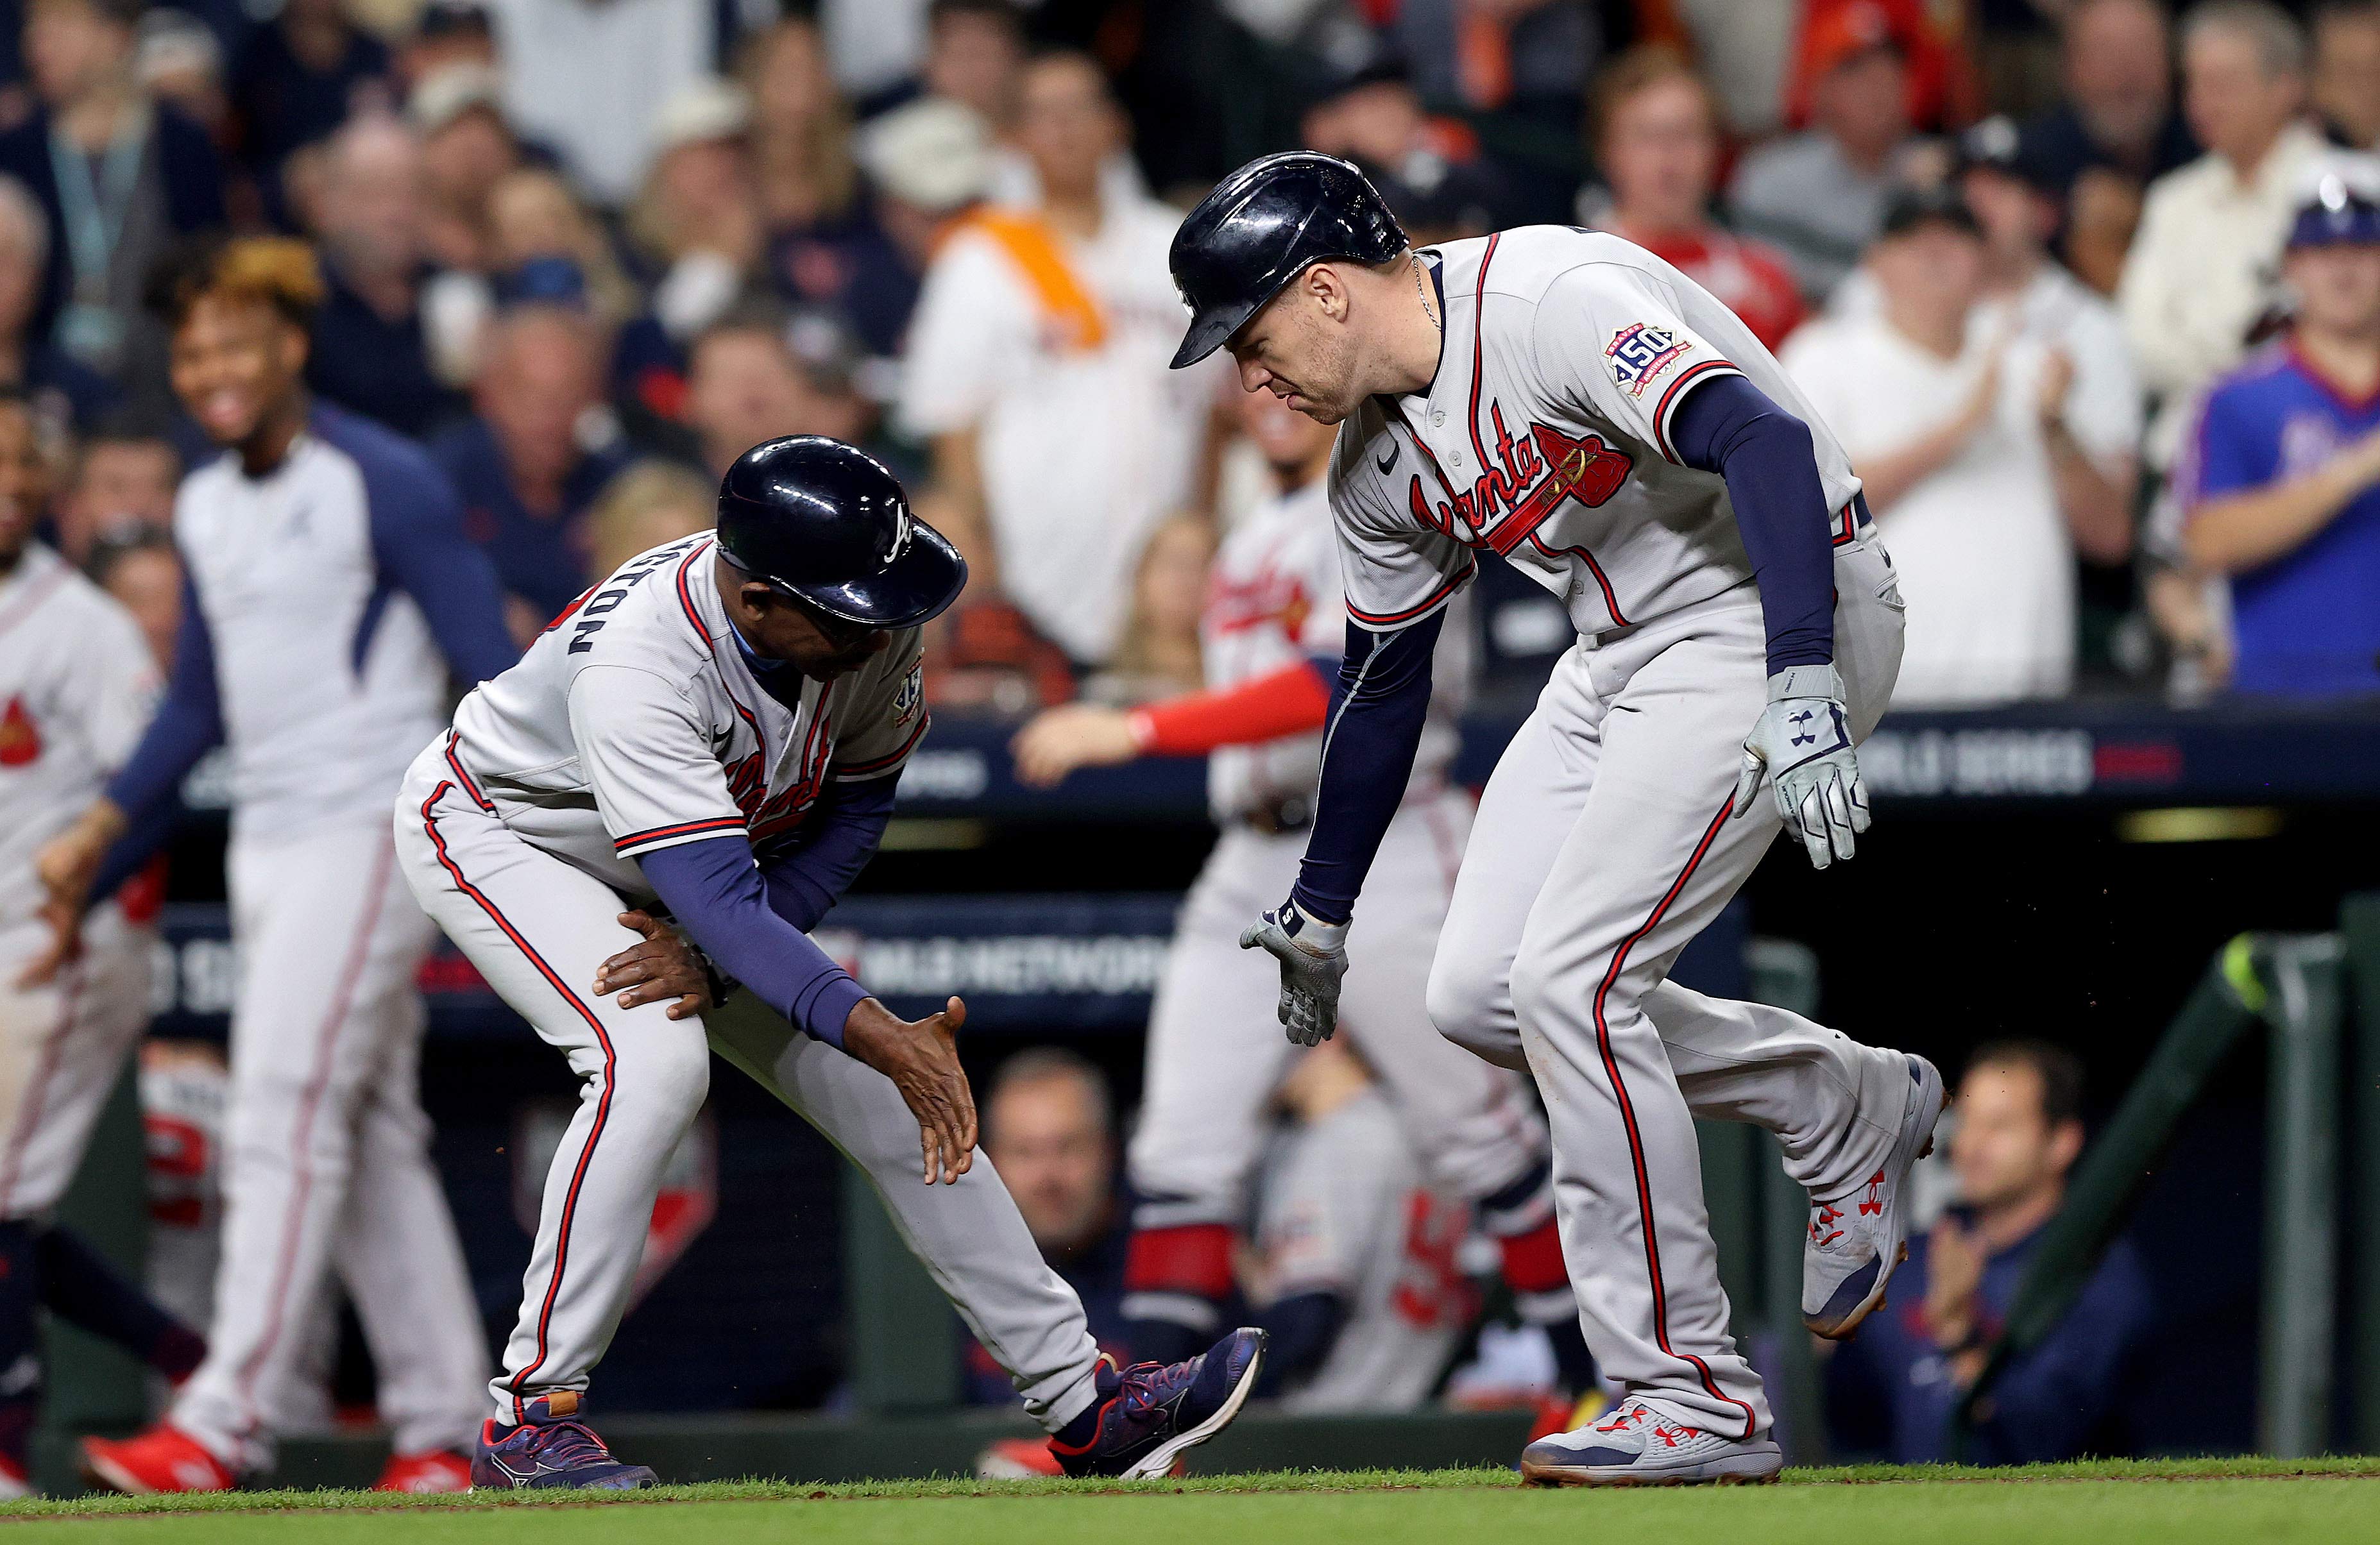 Freddie Freeman of the Braves is congratulated by third base coach Ron Washington after hitting a solo home run during the seventh inning in Game 6.